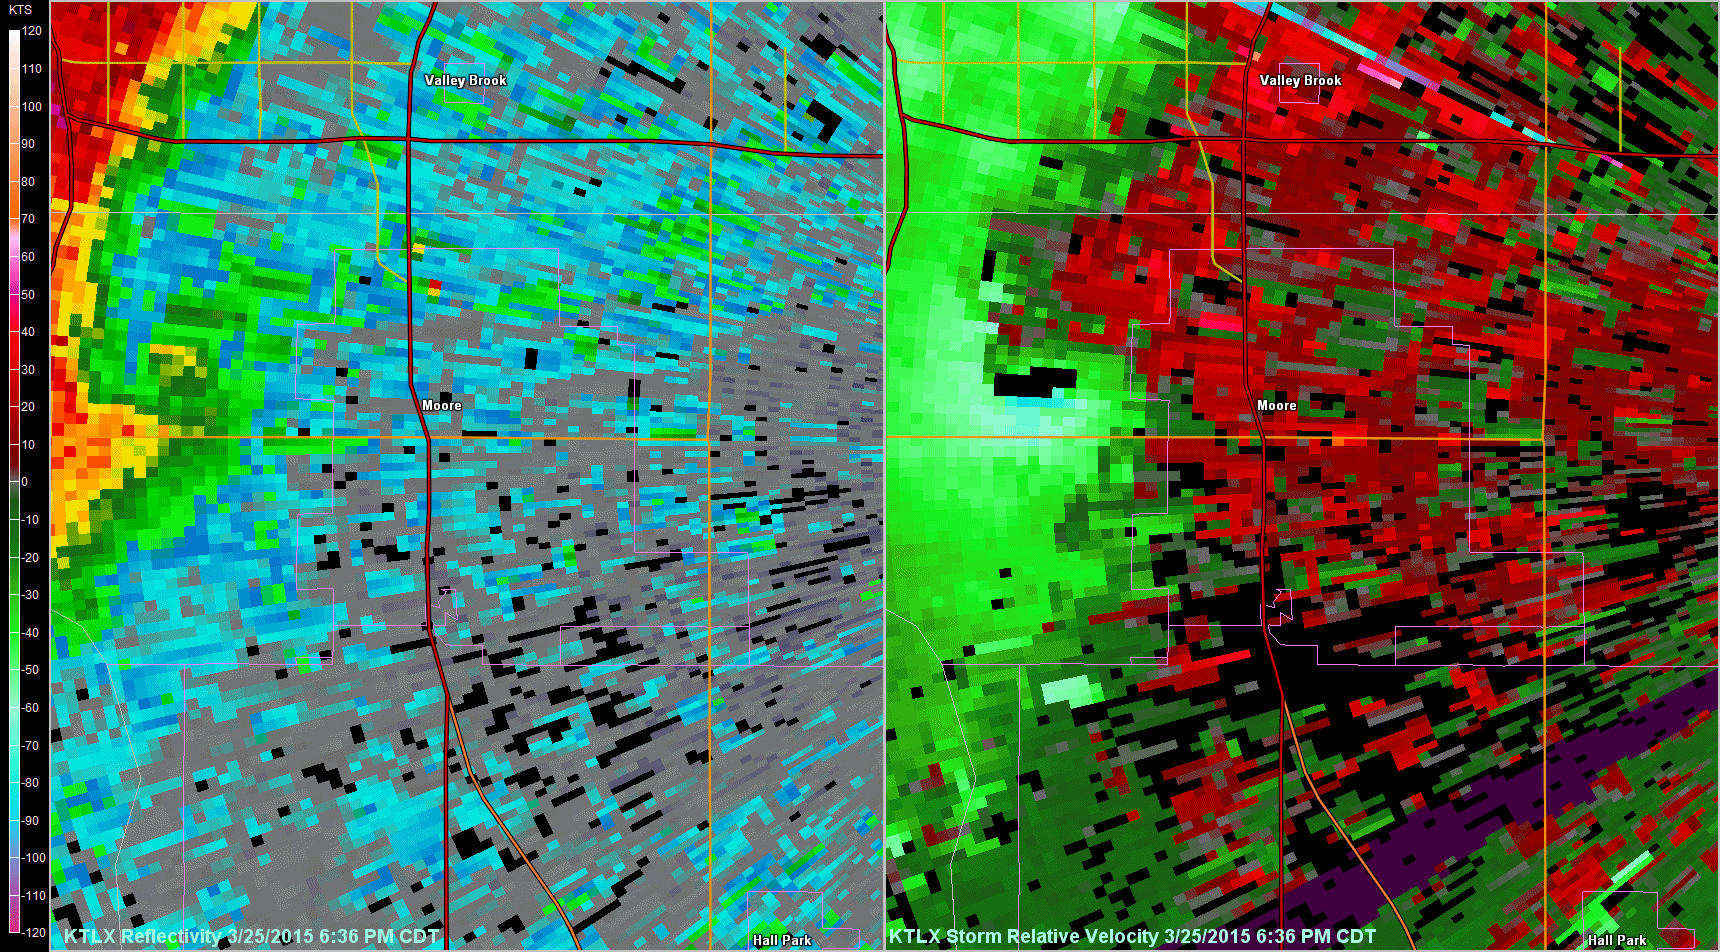 2-panel Loop of Reflectivity/Storm Relative Velocity for the Twin Lakes, OK (KTLX) Radar on March 25, 2015